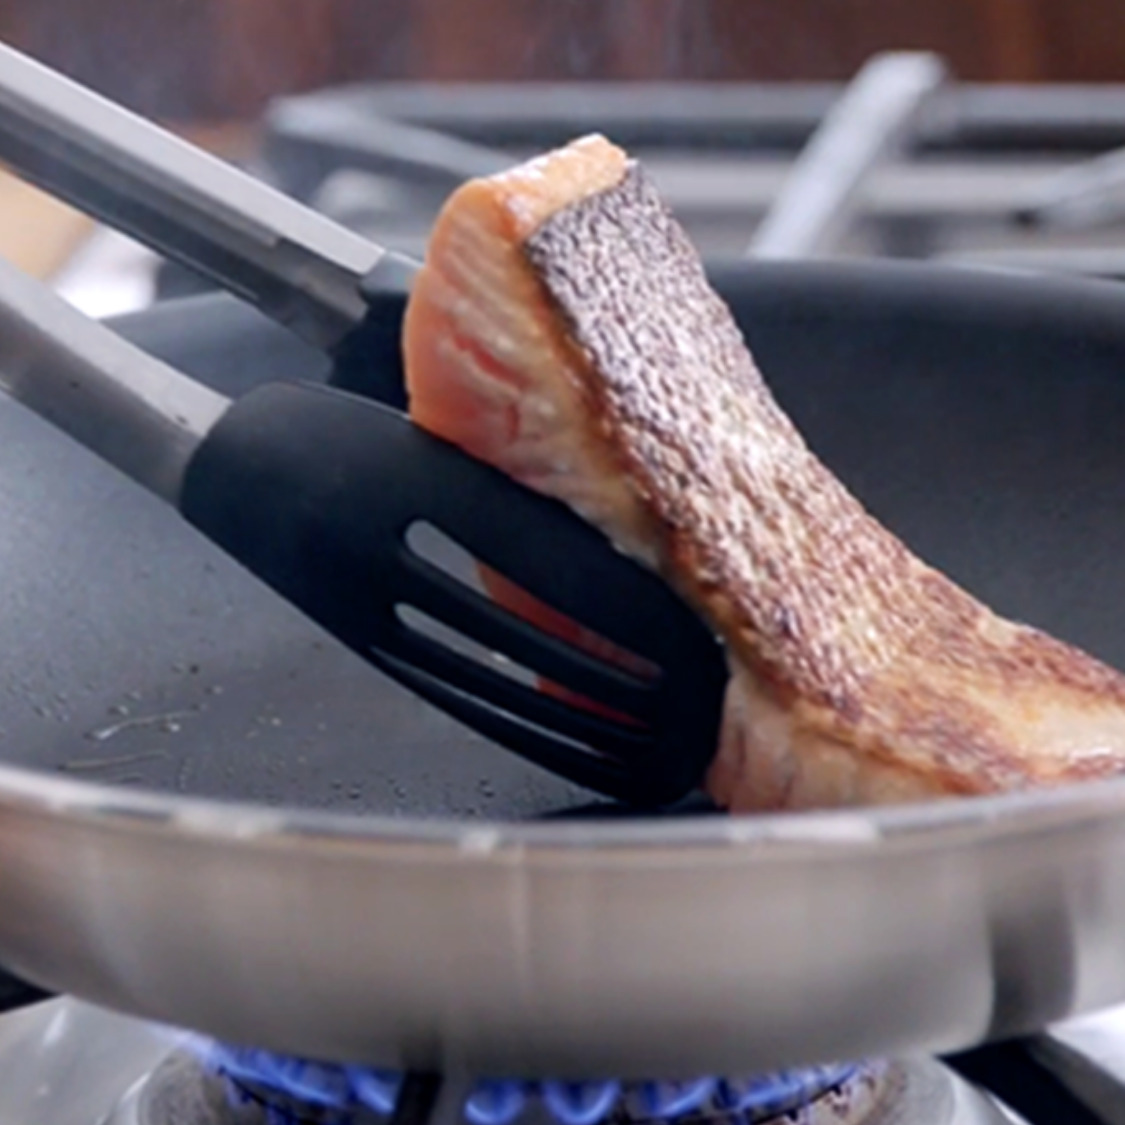 We love using the Misen Nonstick Pan for cooking delicate foods like fish.